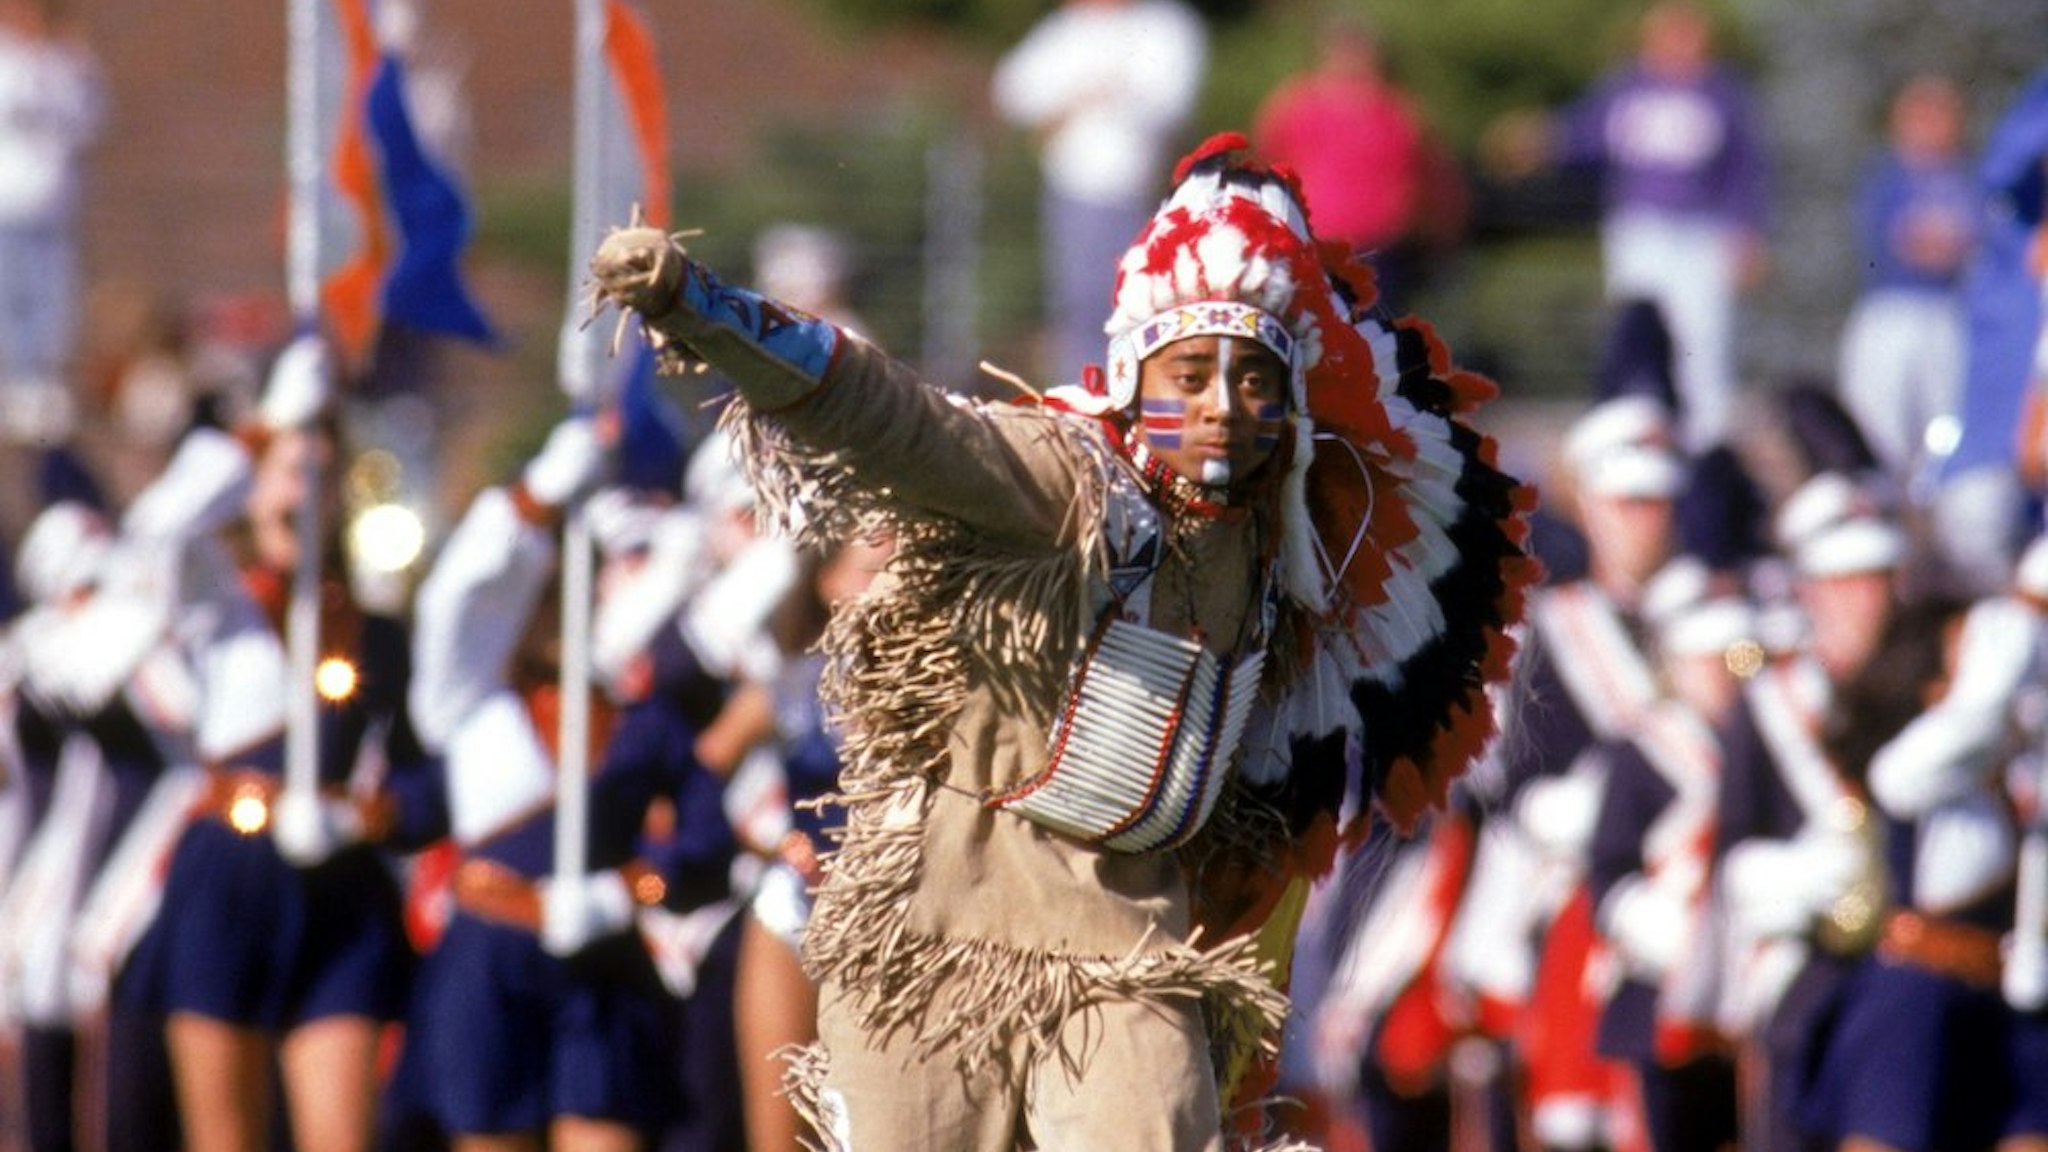 The Illinois Fighting Illini mascot Chief Illiniwek performs during the game against the Houston Cougars at Memorial Stadium on September 21, 1991 in Champaign, Illinois. Illinois won 51-10. (Photo by Bernstein Associates/Getty Images)